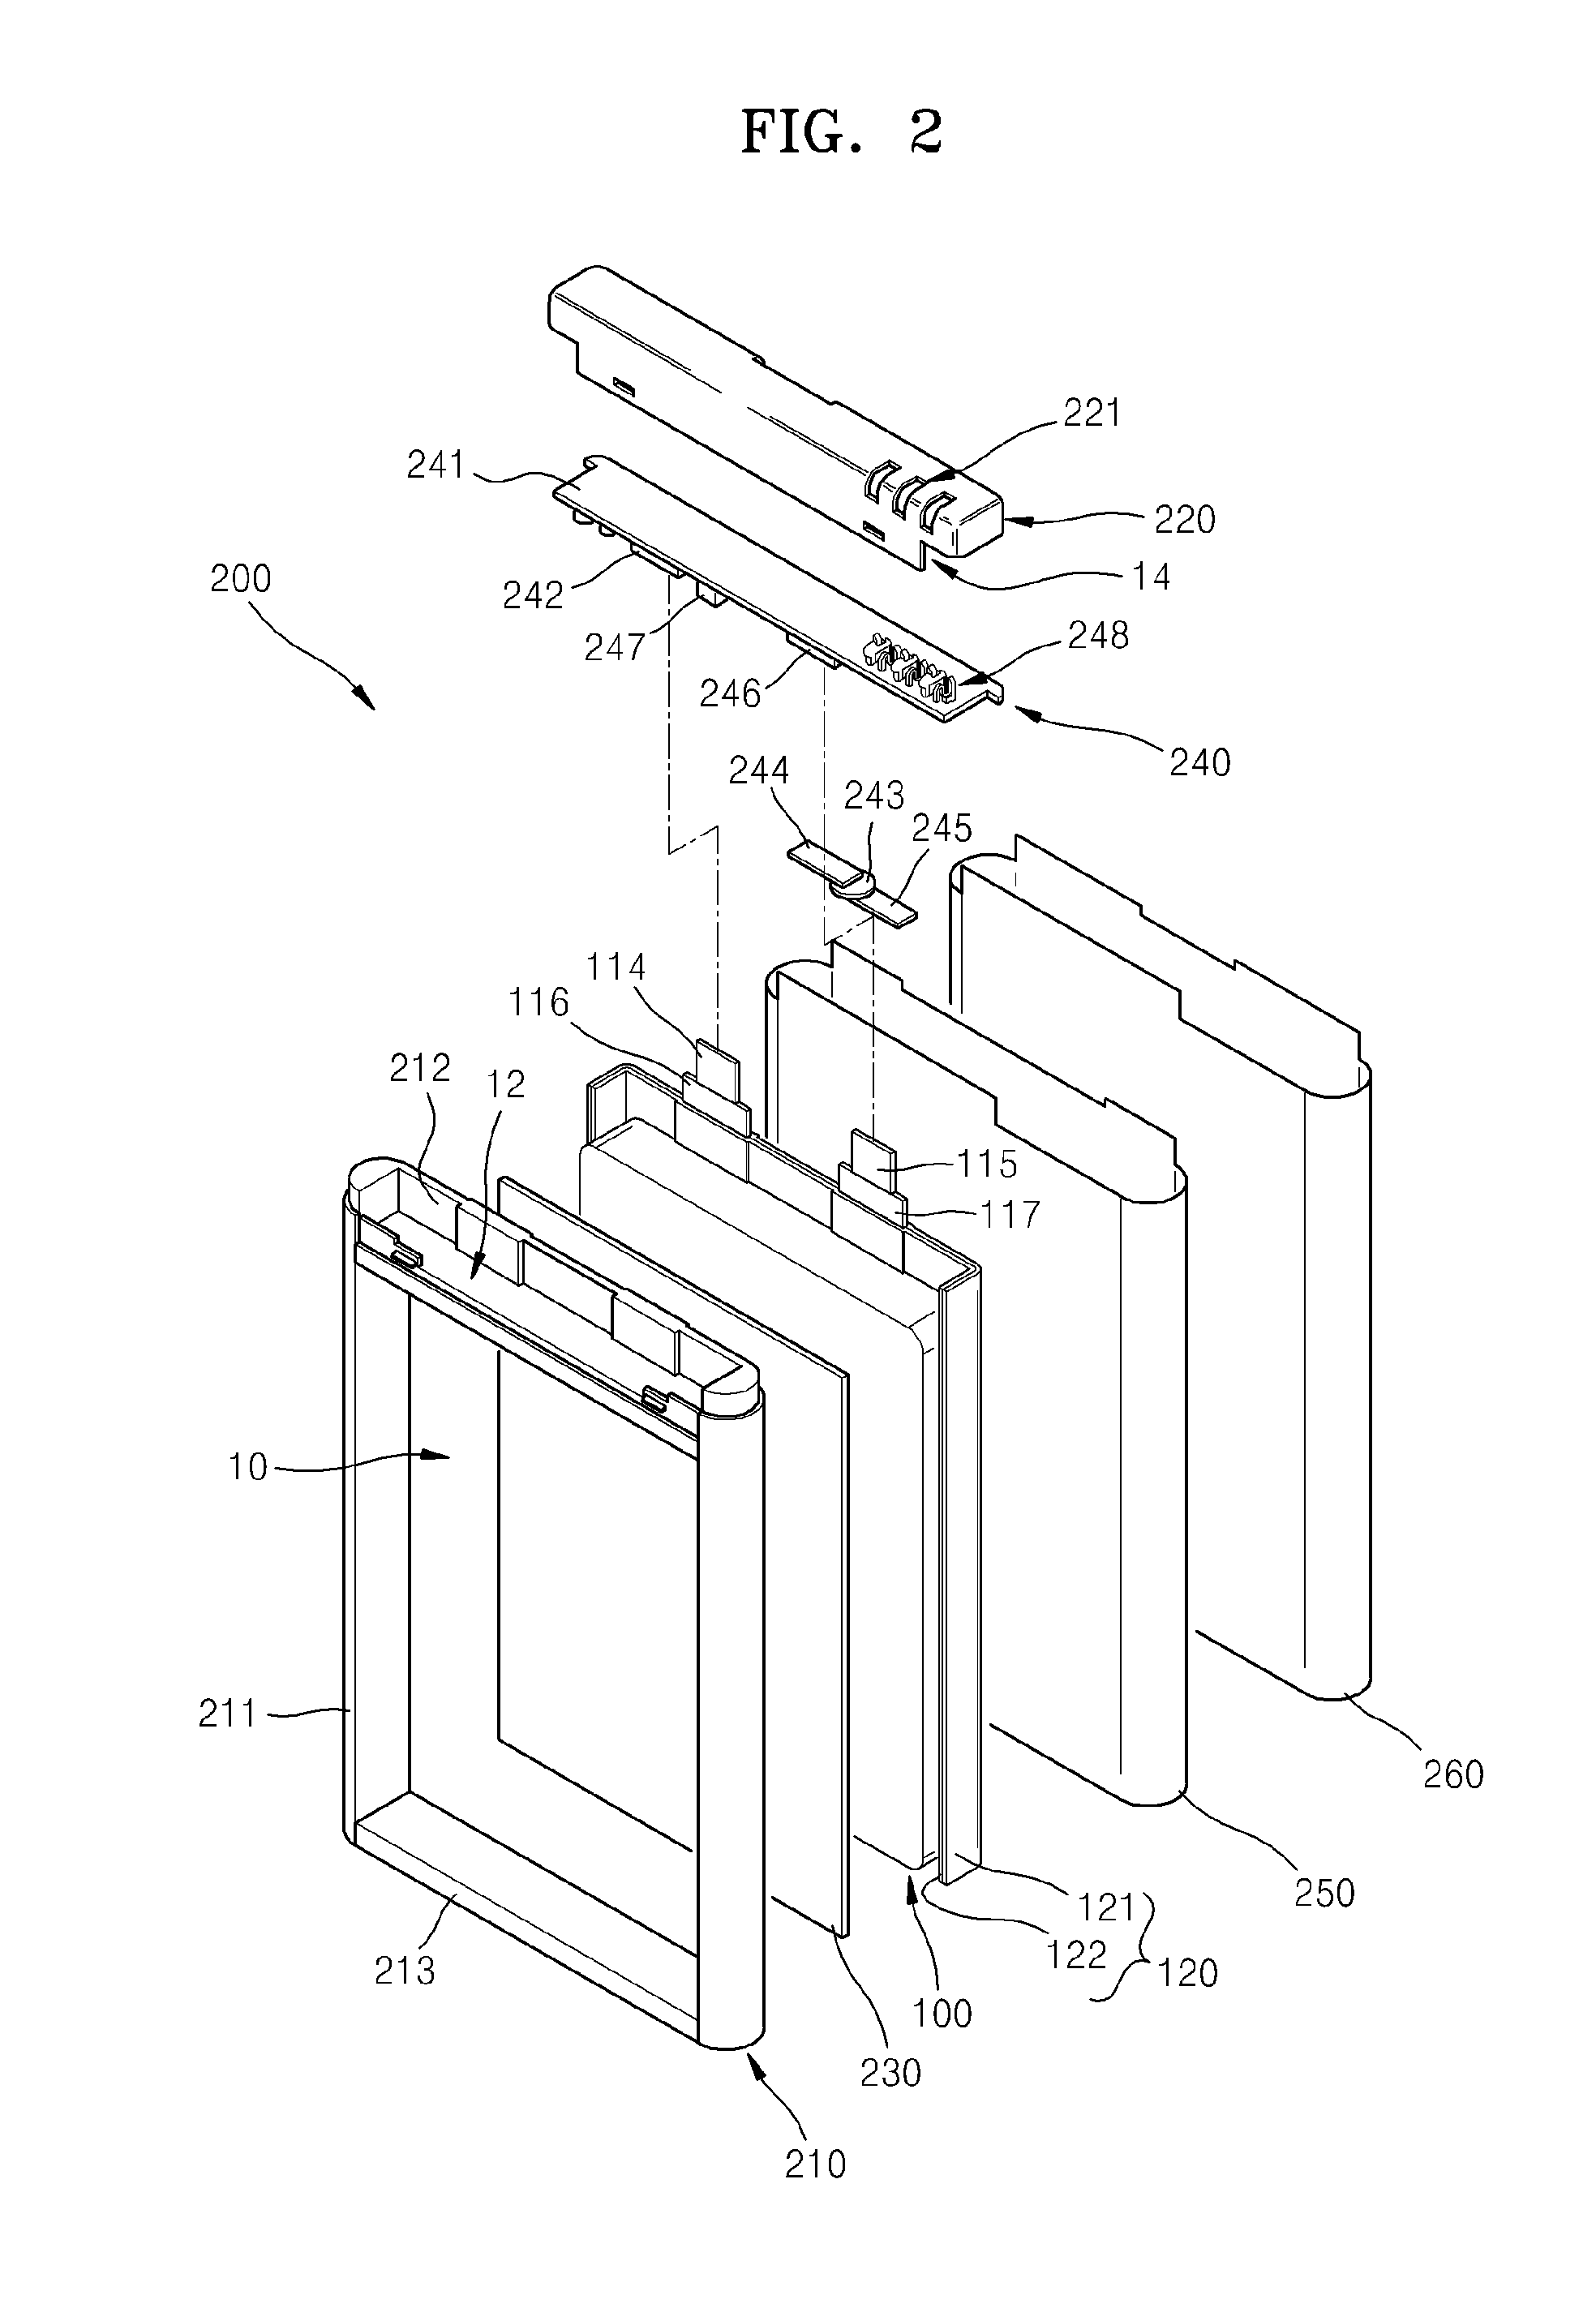 Battery Pack for a Lithium Polymer Battery